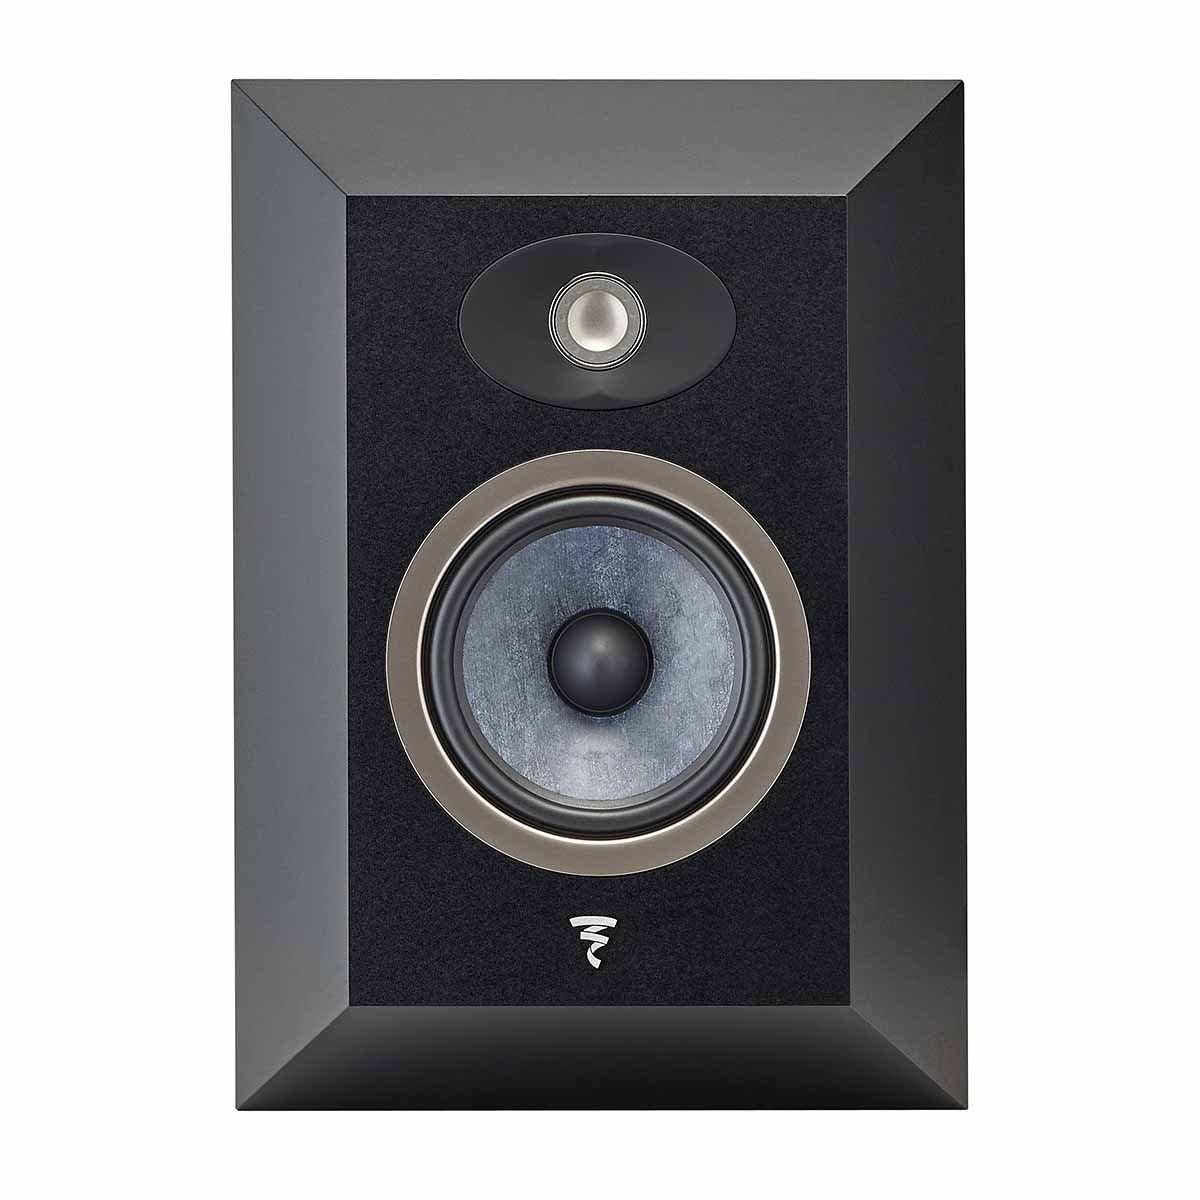 Focal Theva Surround Speaker - Black - each - front view without grille